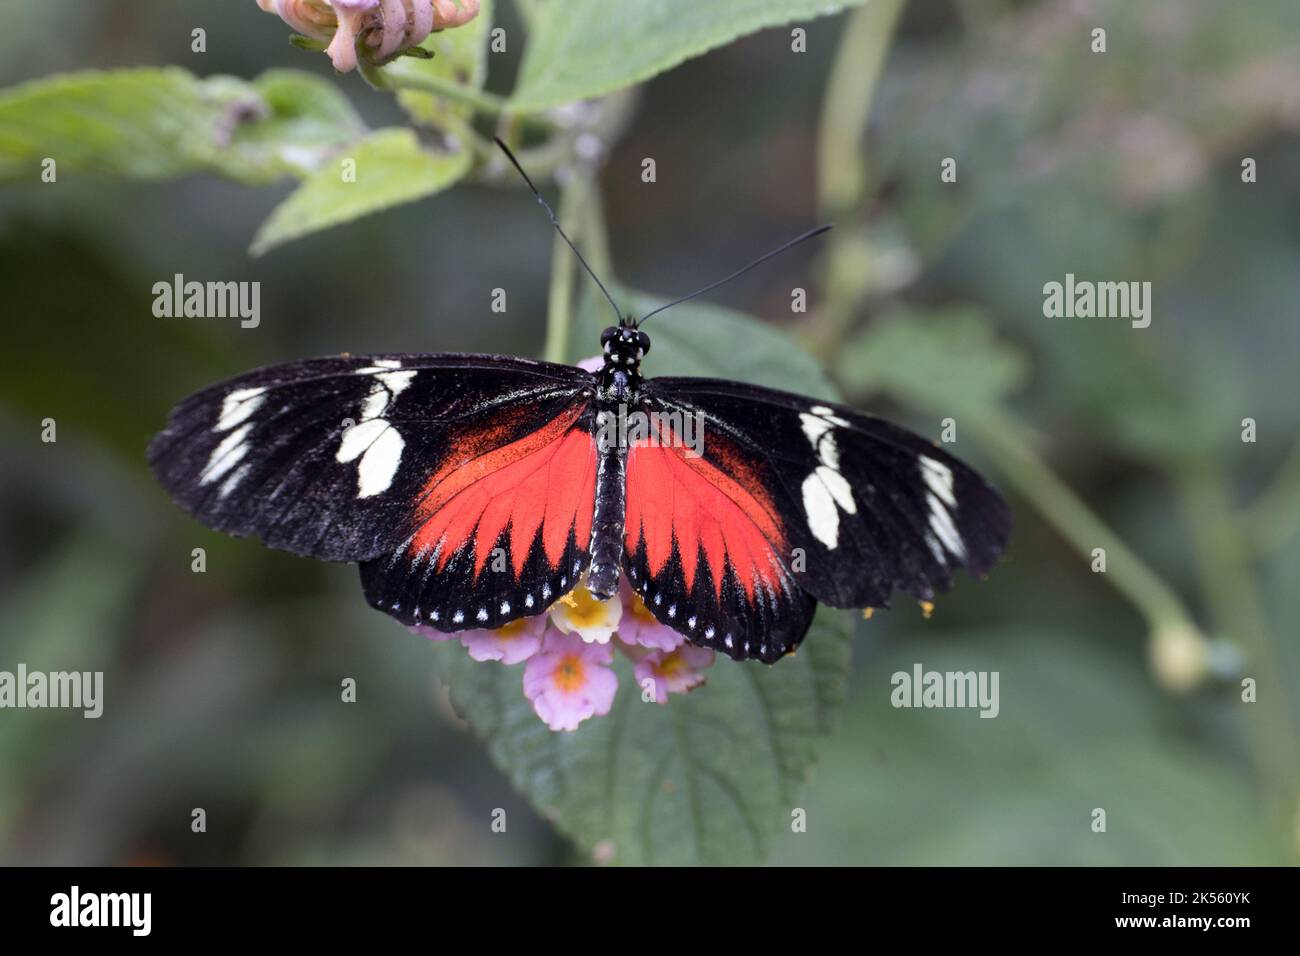 Single Postman butterfly Heliconius melpomene is a brightly colored butterfly found throughout Central and South America.; Stratford on Avon butterfly Stock Photo